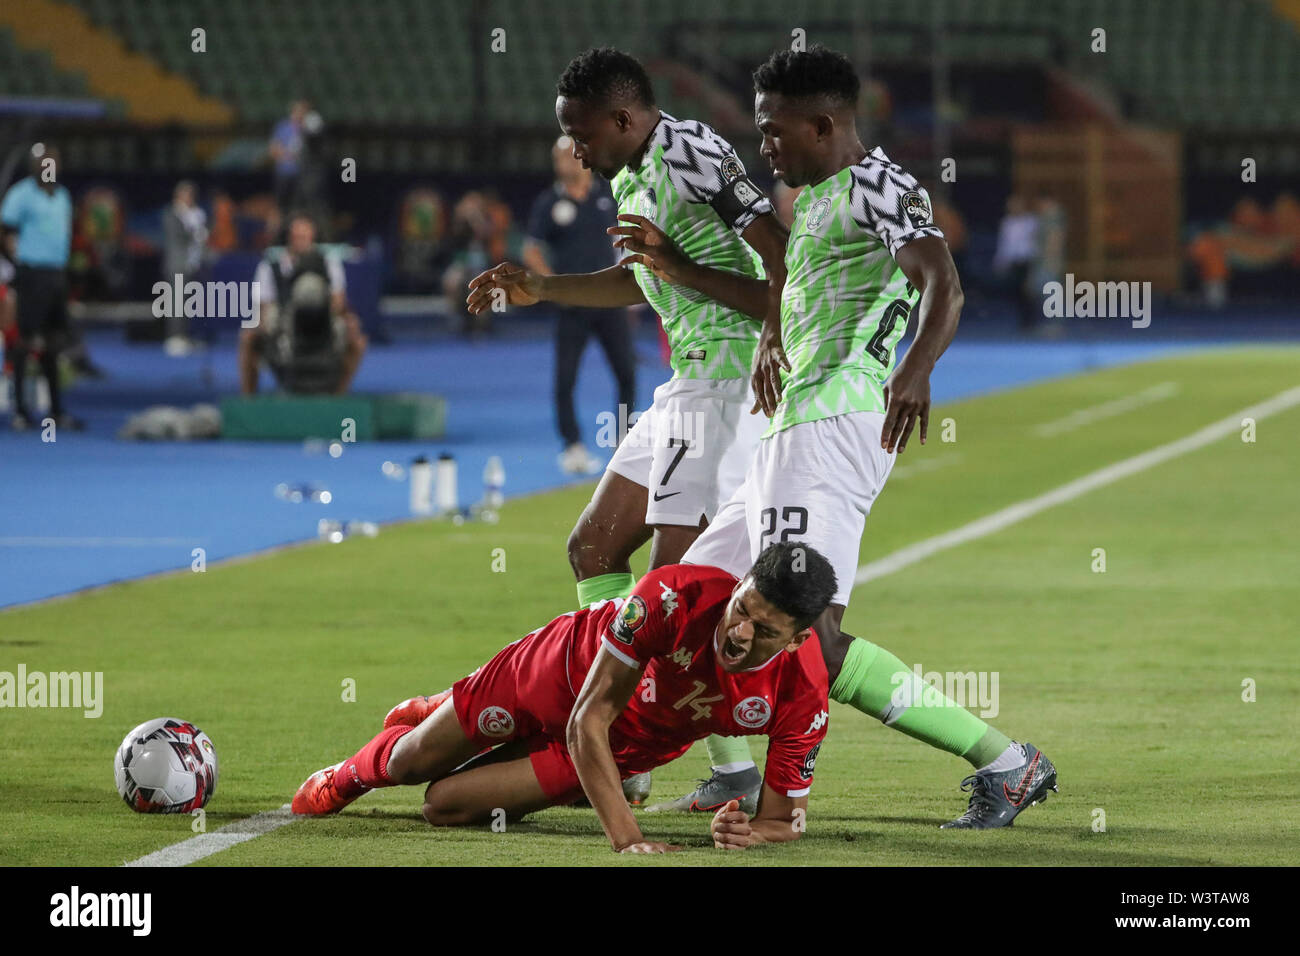 Cairo, Egypt. 17th July, 2019. Nigeria's Ahmed Musa and Nigeria's Kenneth Omeruo battle for the ball with Tunisia's Mohamed Drager during the 2019 Africa Cup of Nations third place final soccer match between Tunisia and Nigeria at the Al-Salam Stadium. Credit: Gehad Hamdy/dpa/Alamy Live News Stock Photo